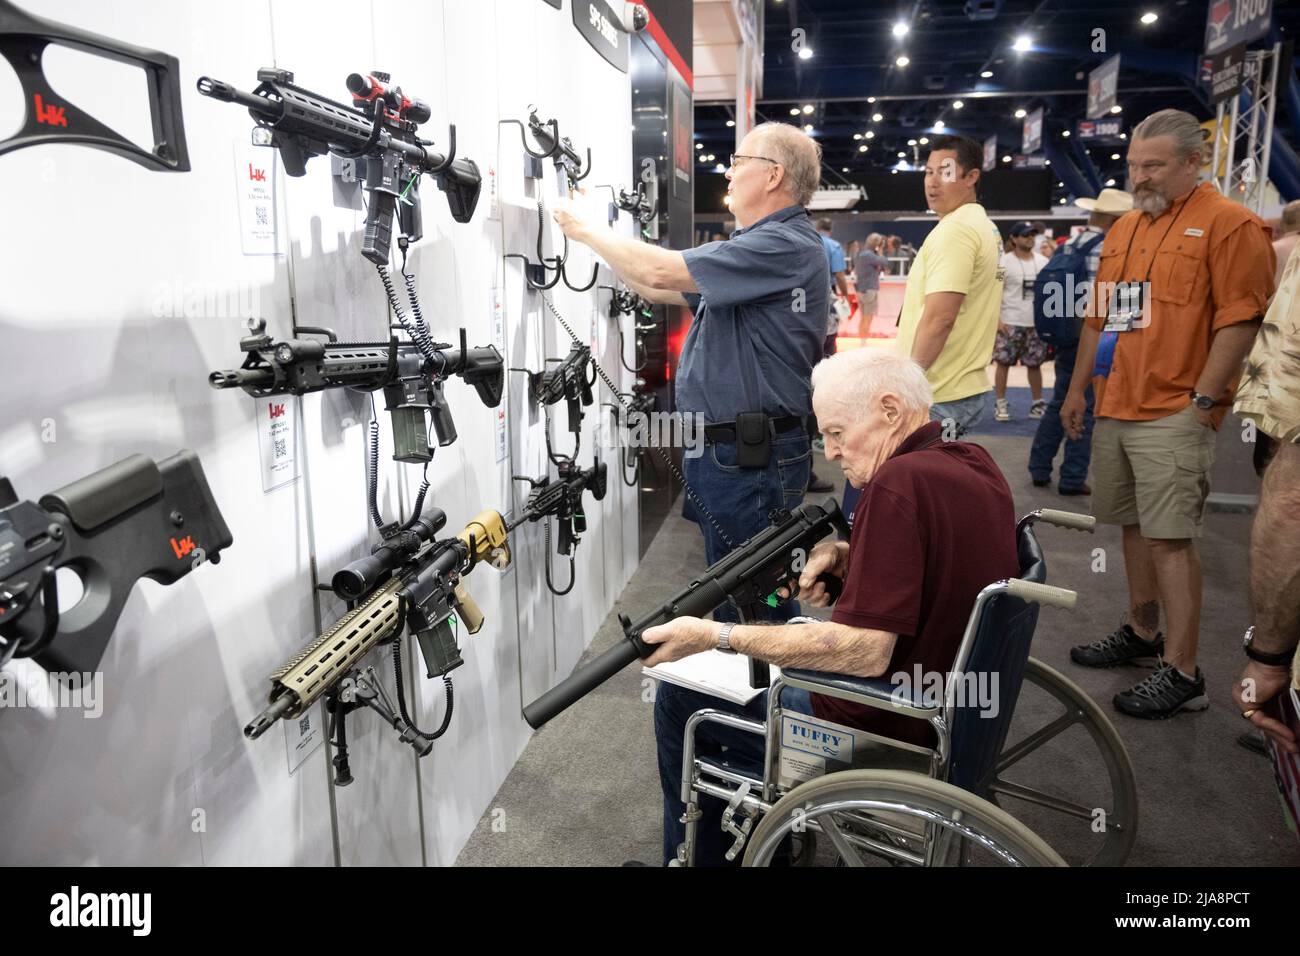 Houston, Texas United States, 28th May 2022: Gun enthusiasts shop for firearms, ammunition and outdoor products at the HK booth at the National Rifle Association's (NRA) trade show. The exhibits cover almost 14 acres inside the George R. Brown Convention Center. Credit: Bob Daemmrich/Alamy Live News Stock Photo